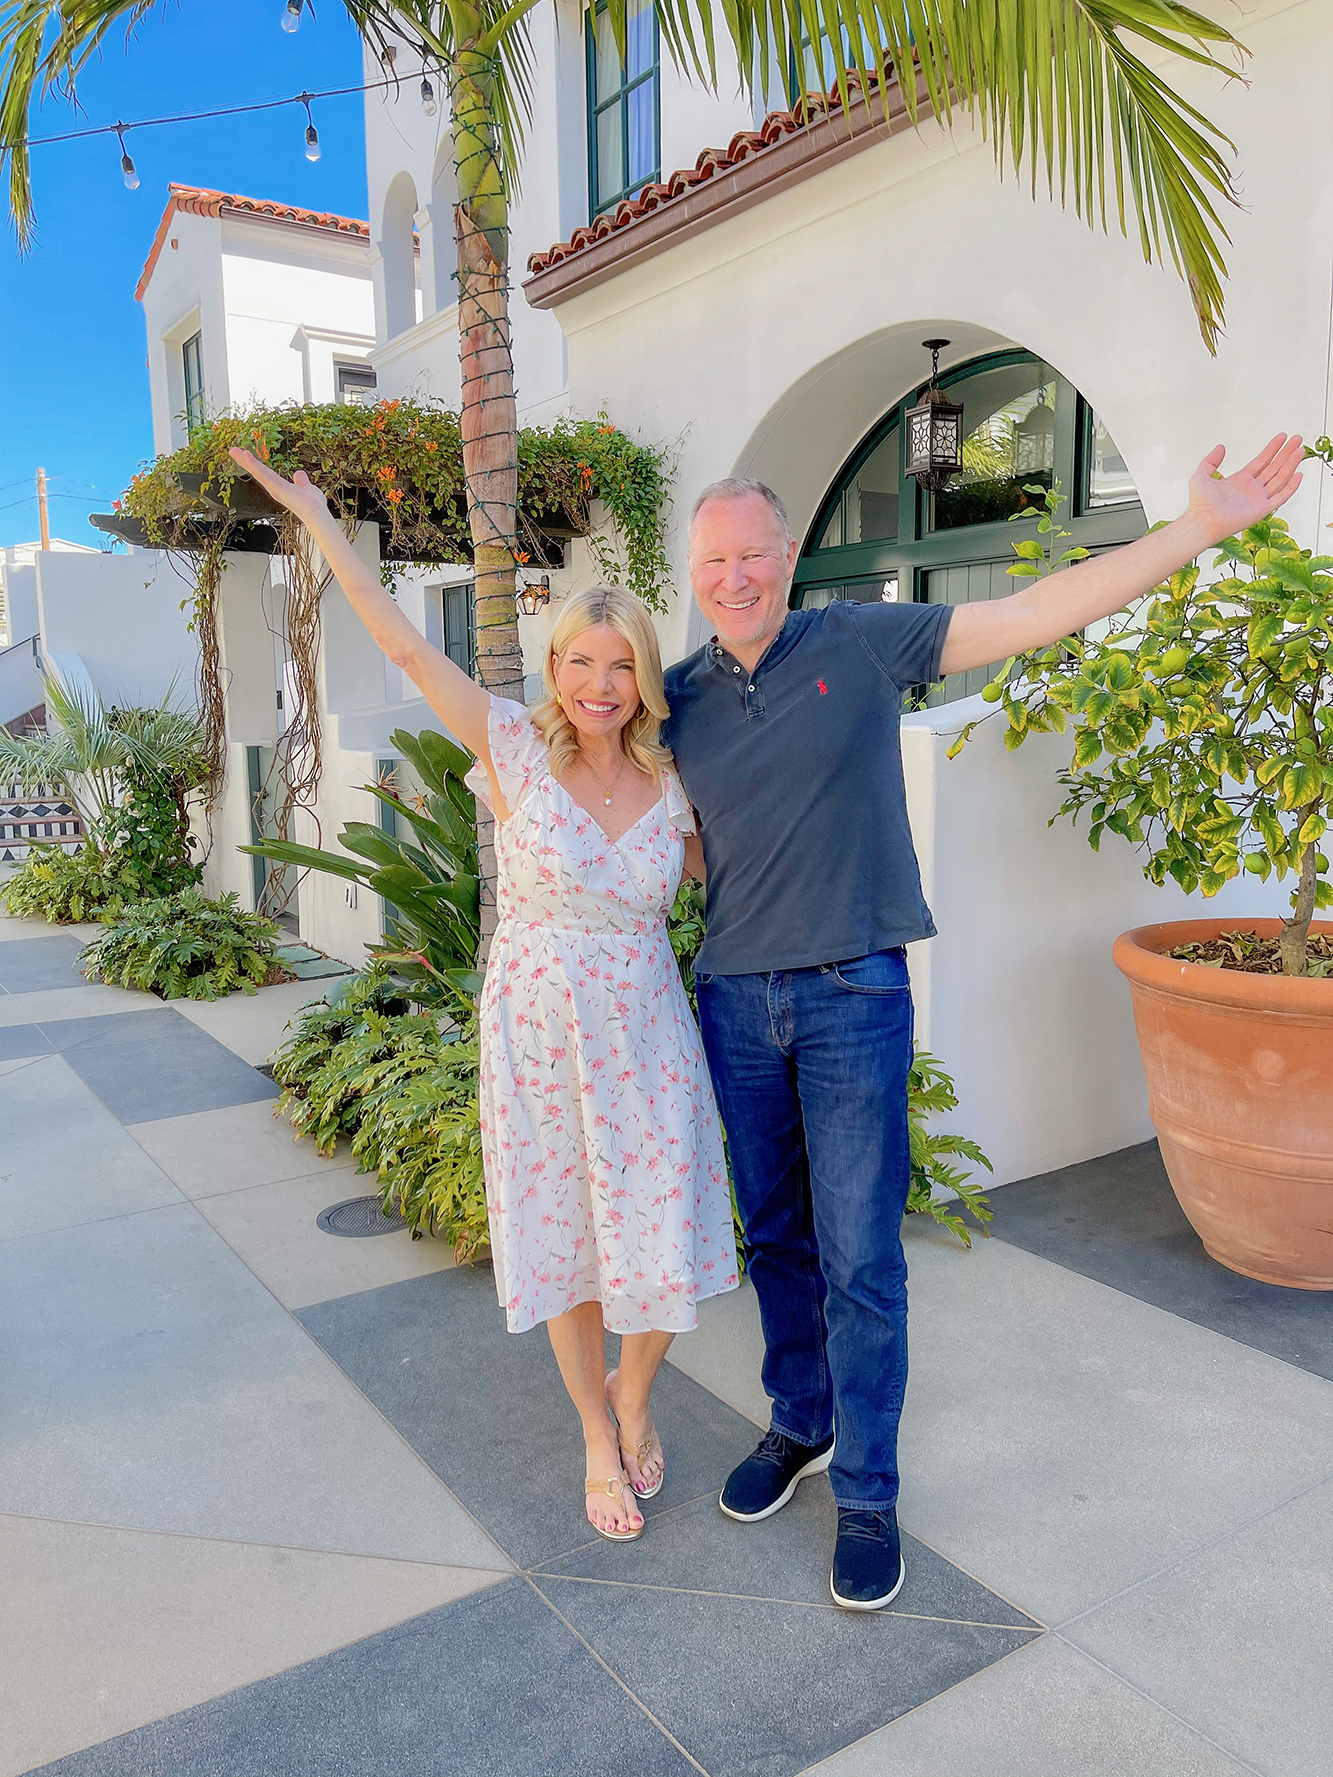 We're moving to Santa Barbara! So exciting and I know this is a shock - but our home has sold and it's pending. We have had a blast. 